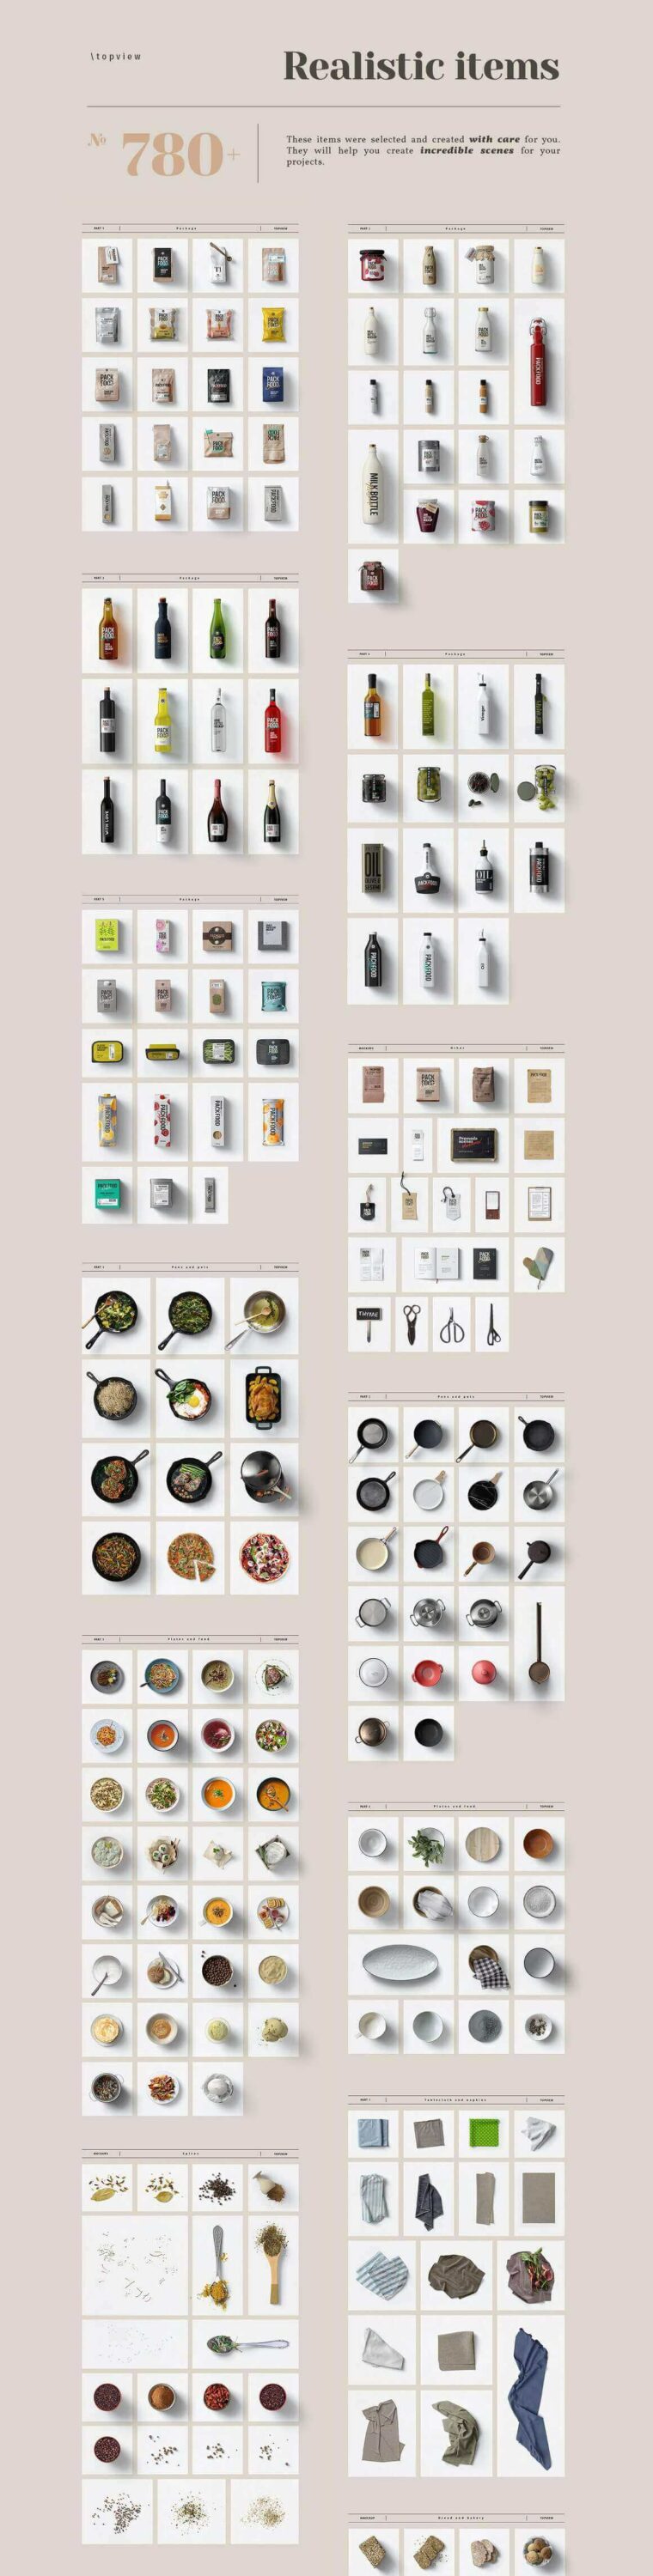 780 Realistic Items.